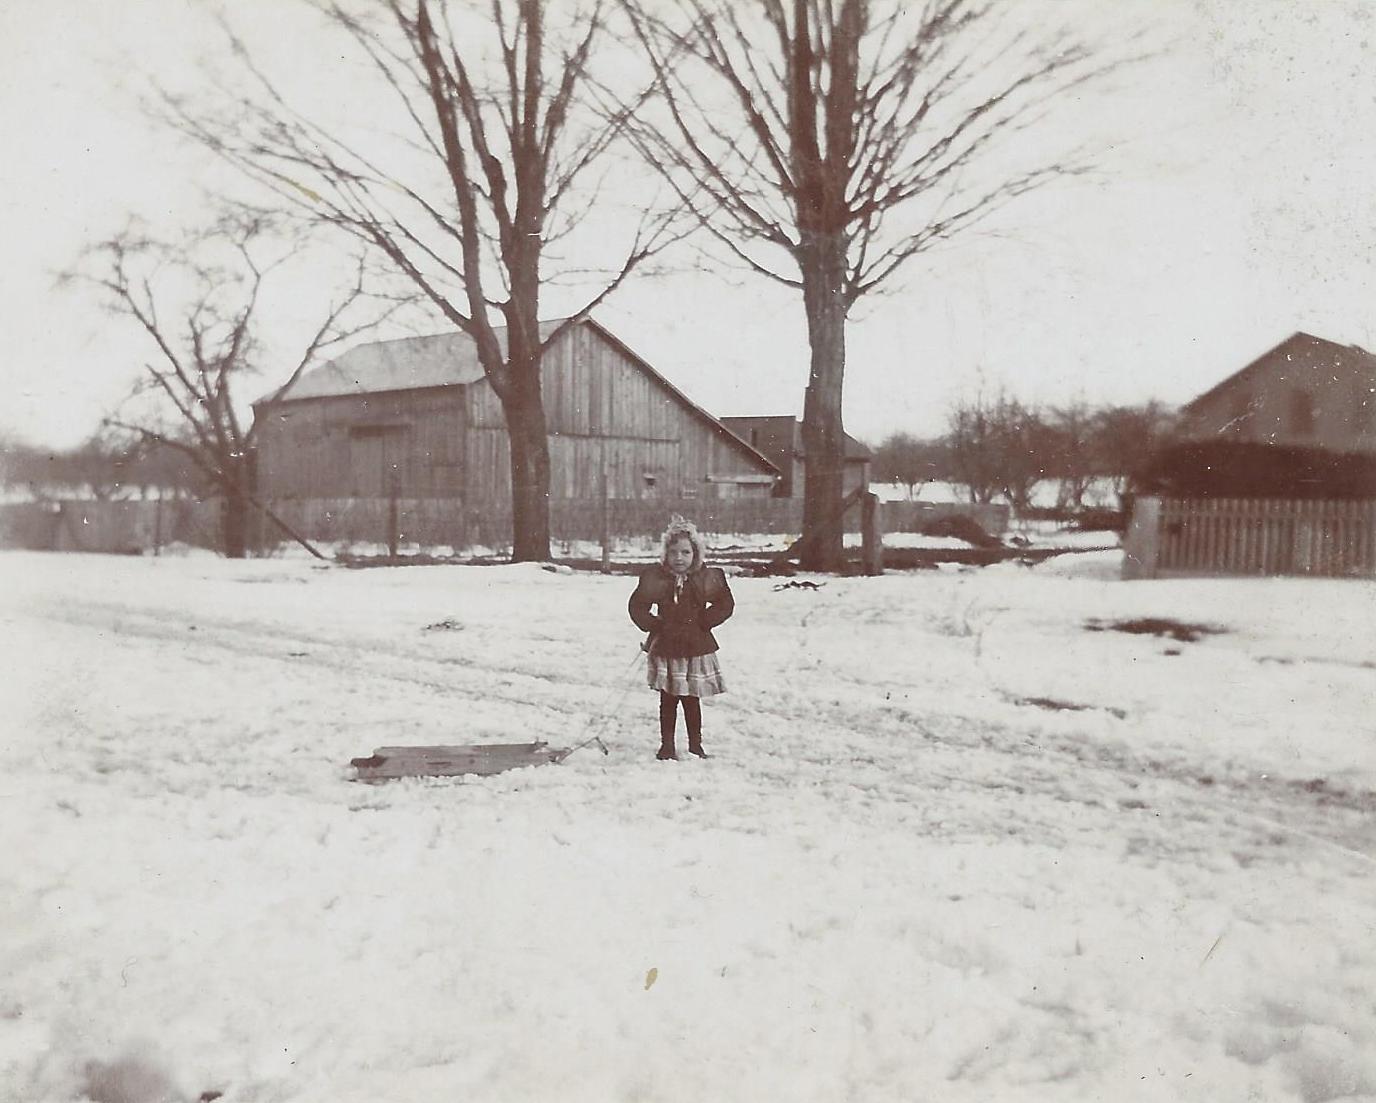 Leta Wilder, granddaughter of Joseph Wilder, with the old mill
building behind her, ca. 1903